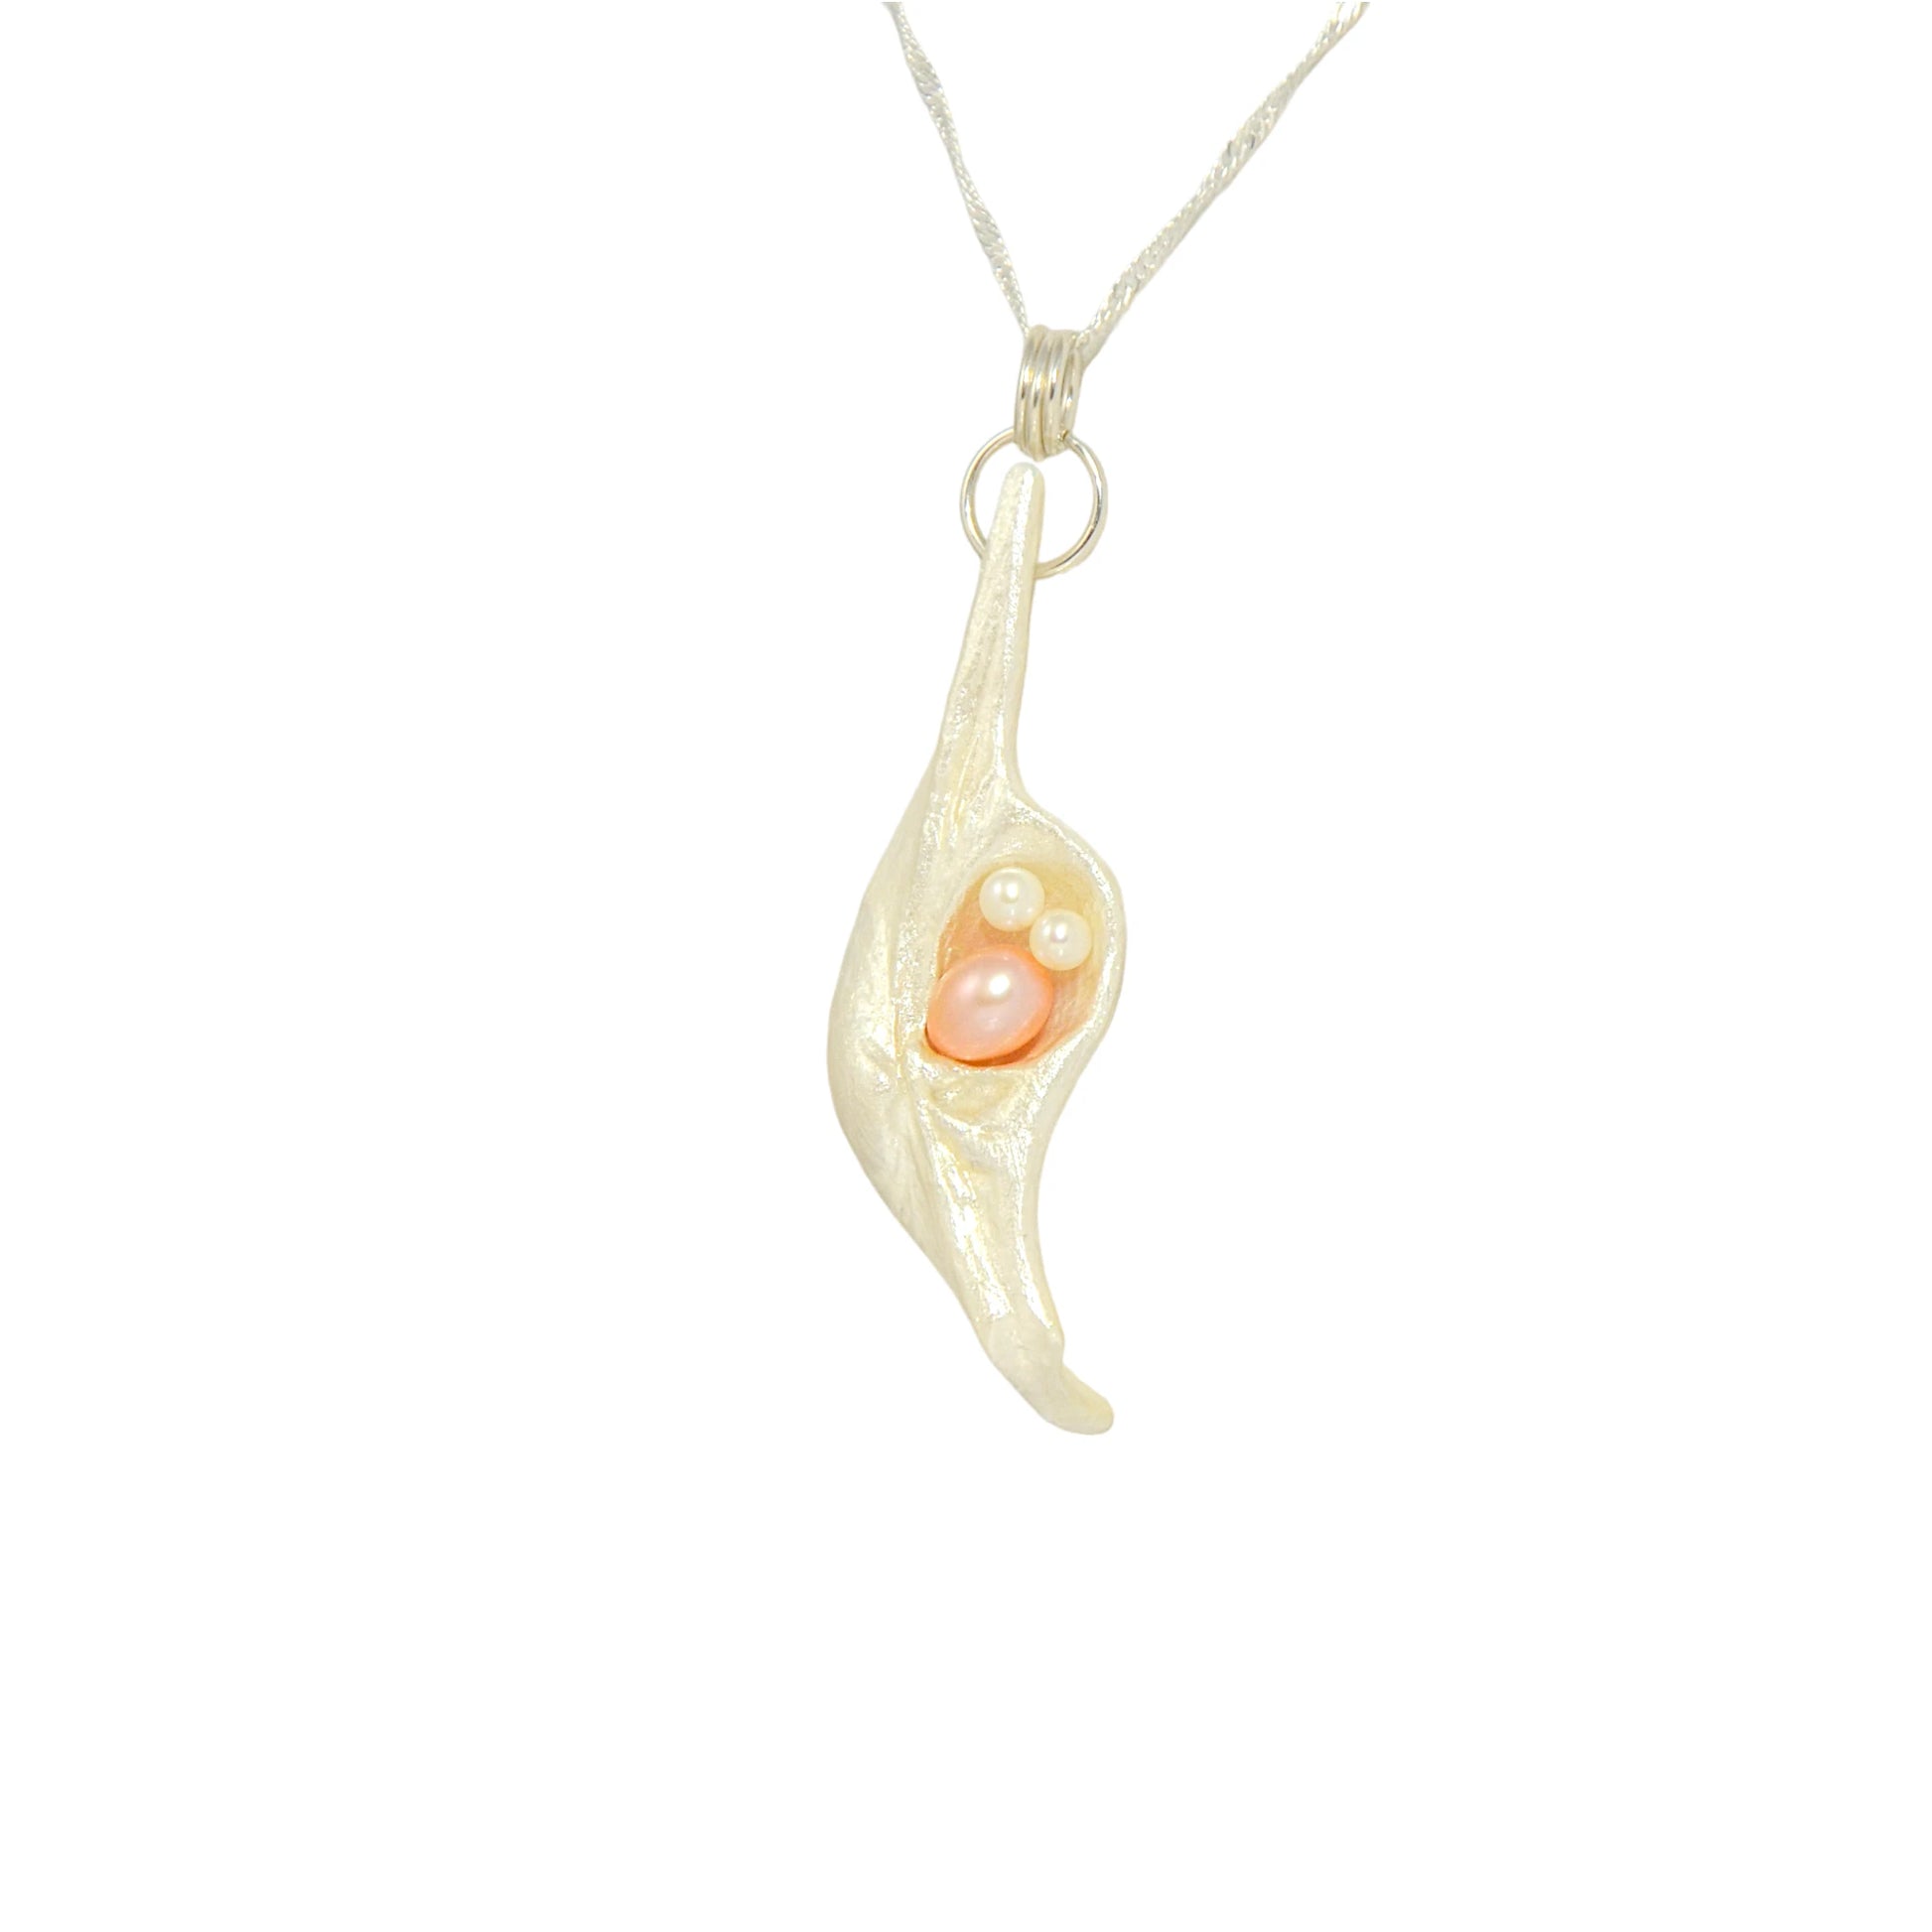 This natural seashell pendant has a real 7-8mm pink freshwater pearl and two baby pearls. The pendant is turned so the viewer can see the left side of the pendant.